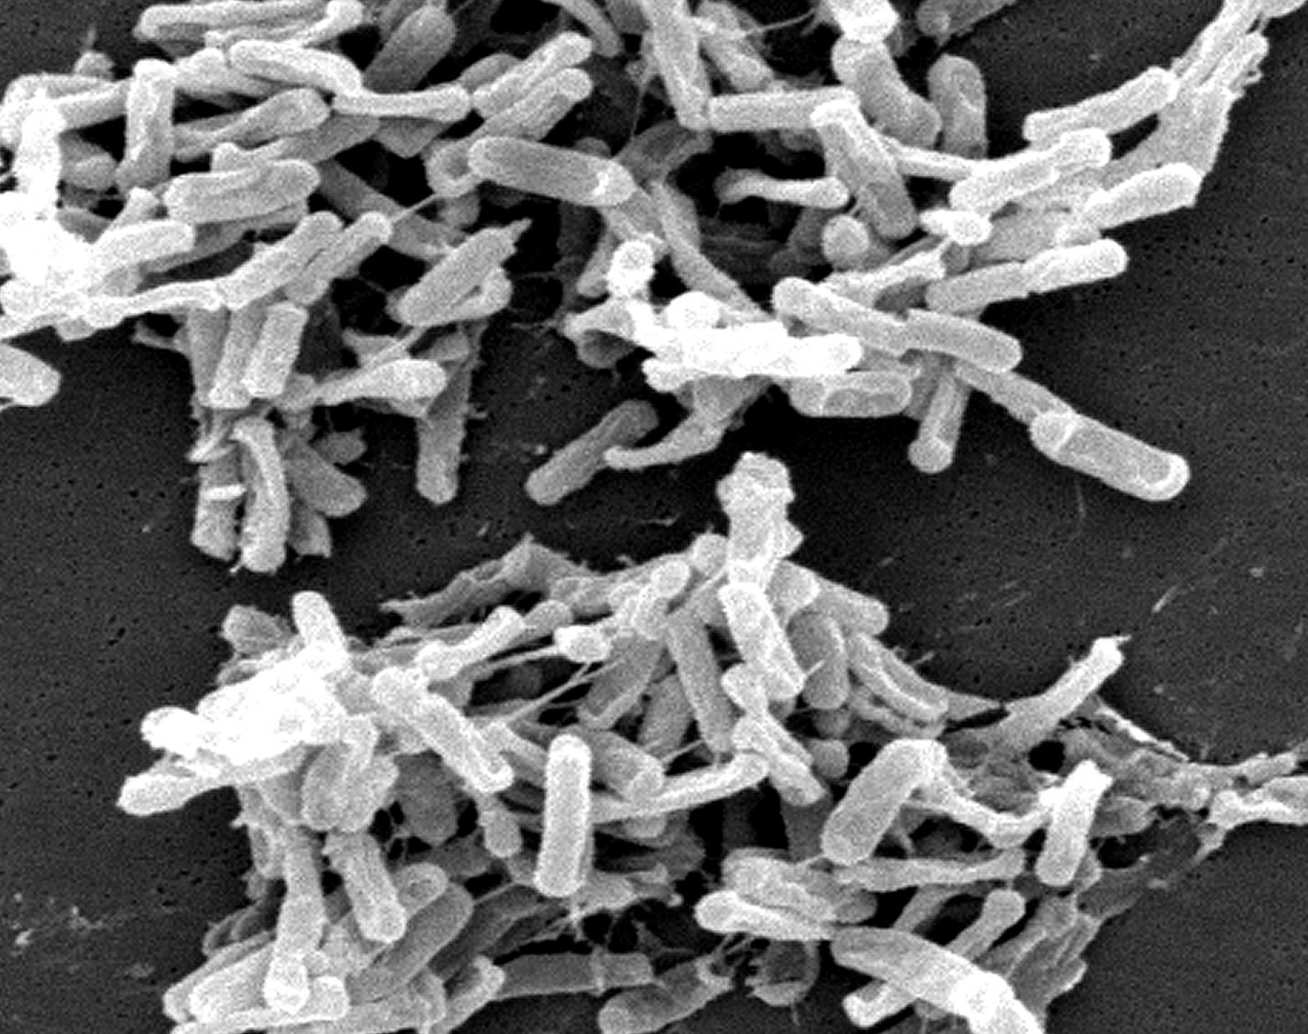 An electron micrograph of C. diff